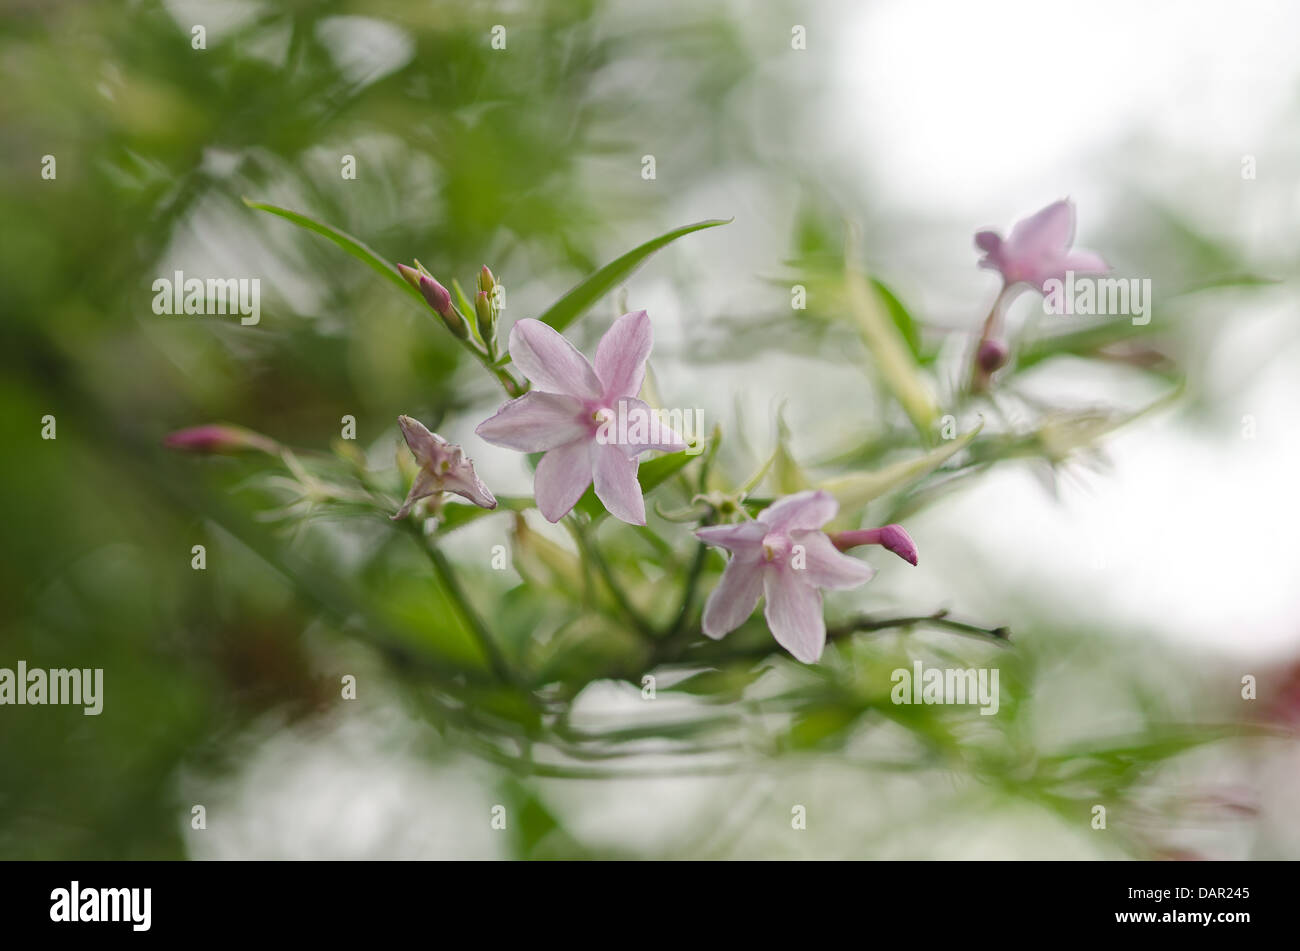 Hanging airy pink jasmine flowers on branch separated from background dappled in sunshine Stock Photo